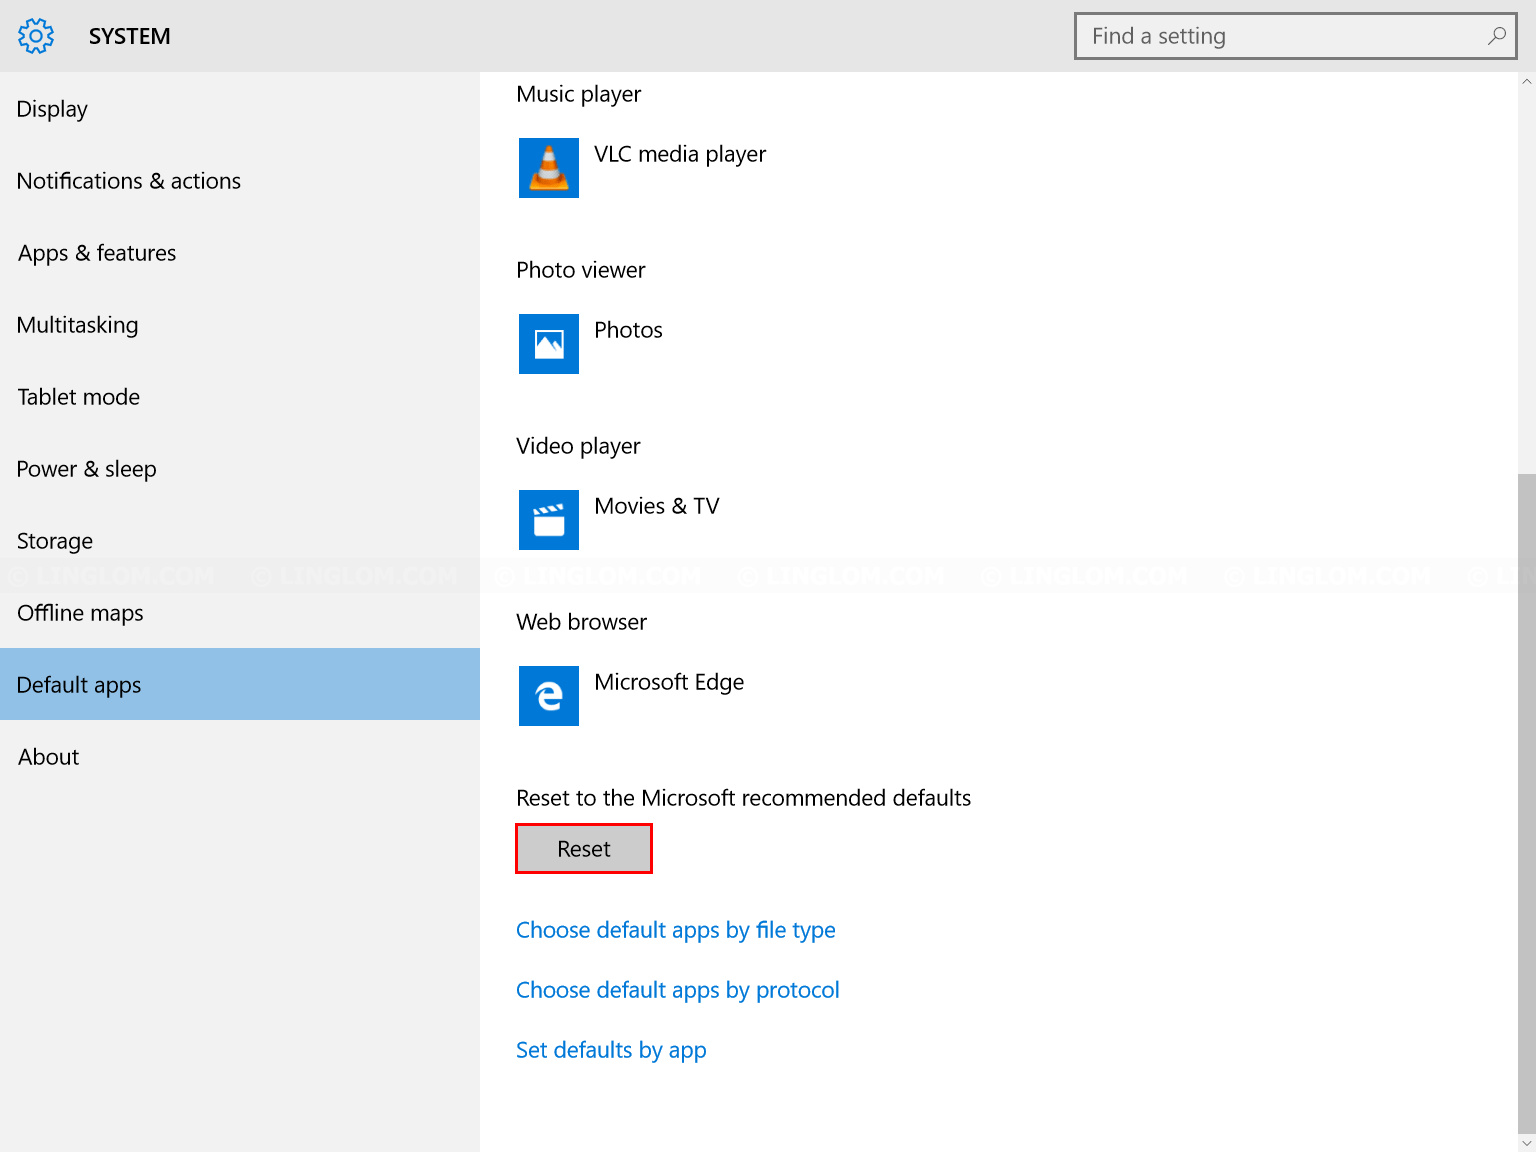 Reset default apps to Microsoft recommended defaults